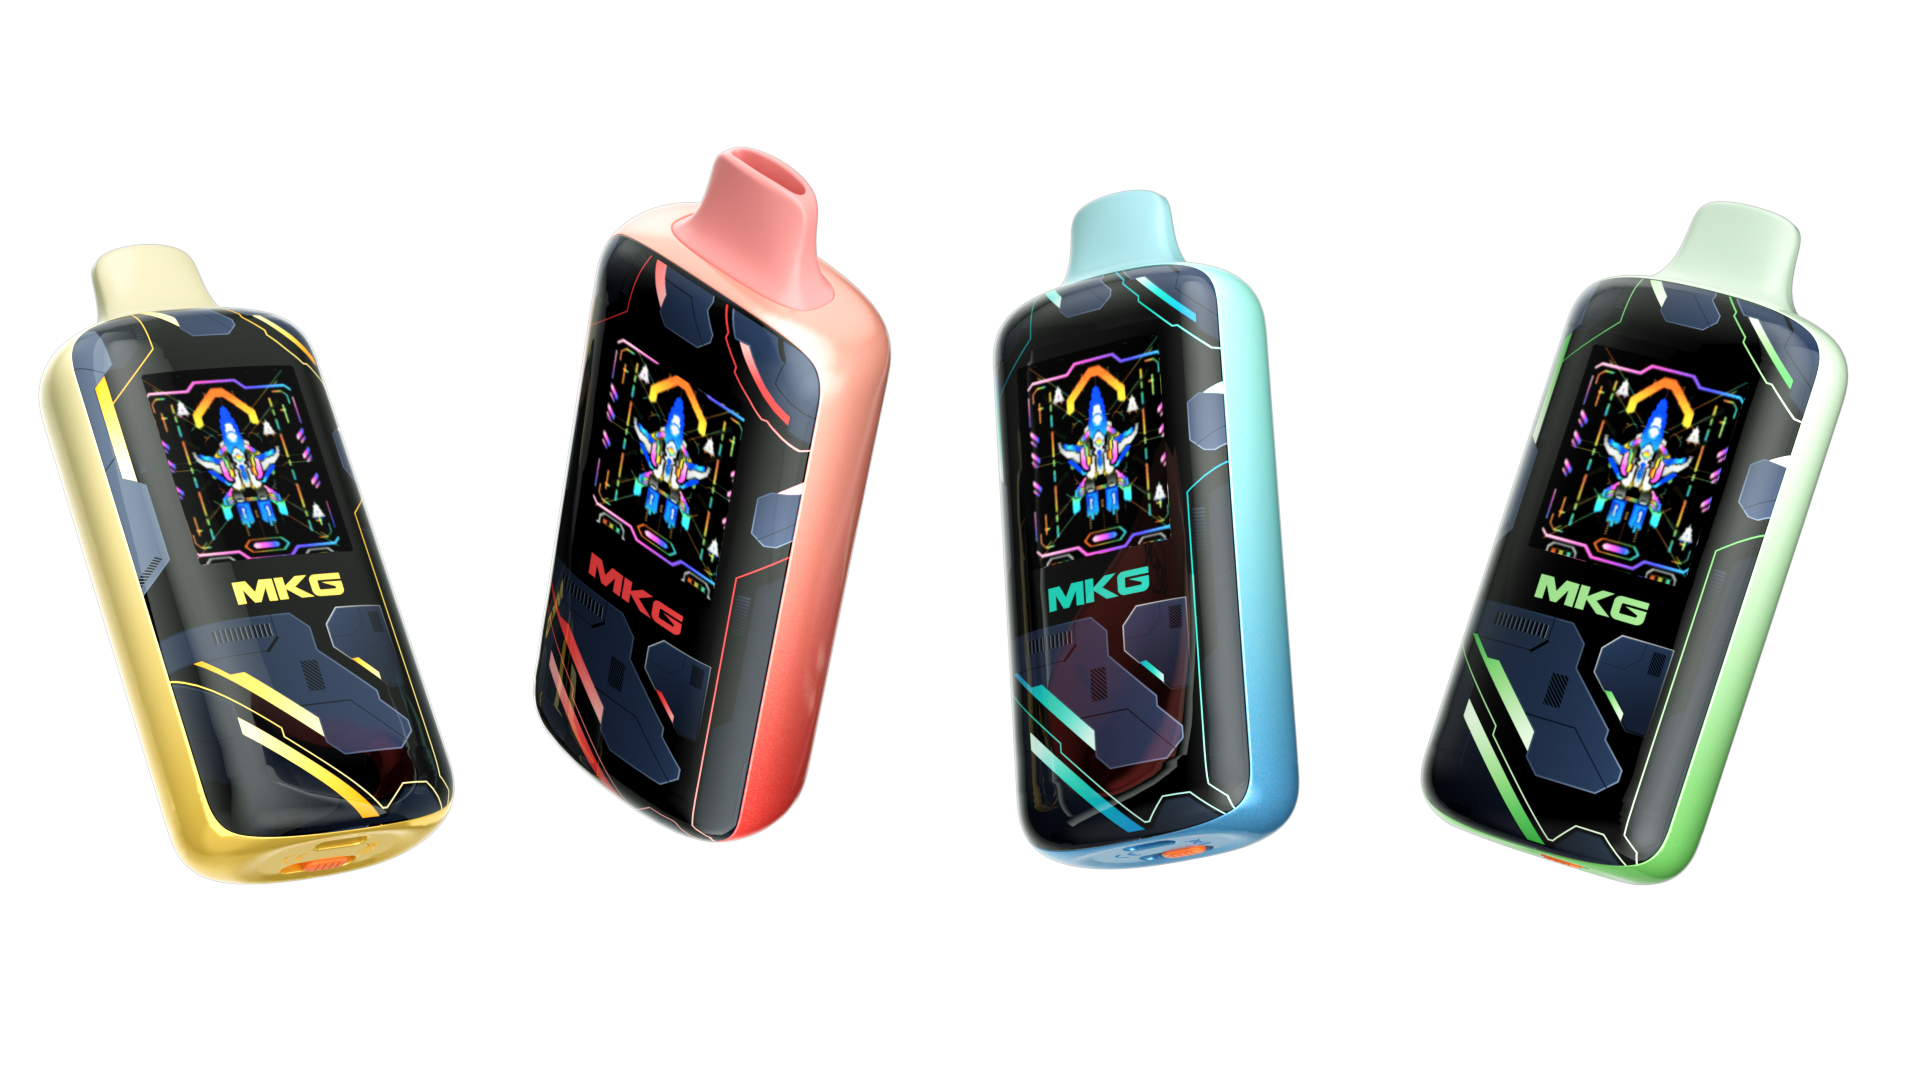 TFT Color Screen Pod System ... From battery life to puff animations and working modes, This smart vape exceeds expectations. ... Elevate your vaping experience